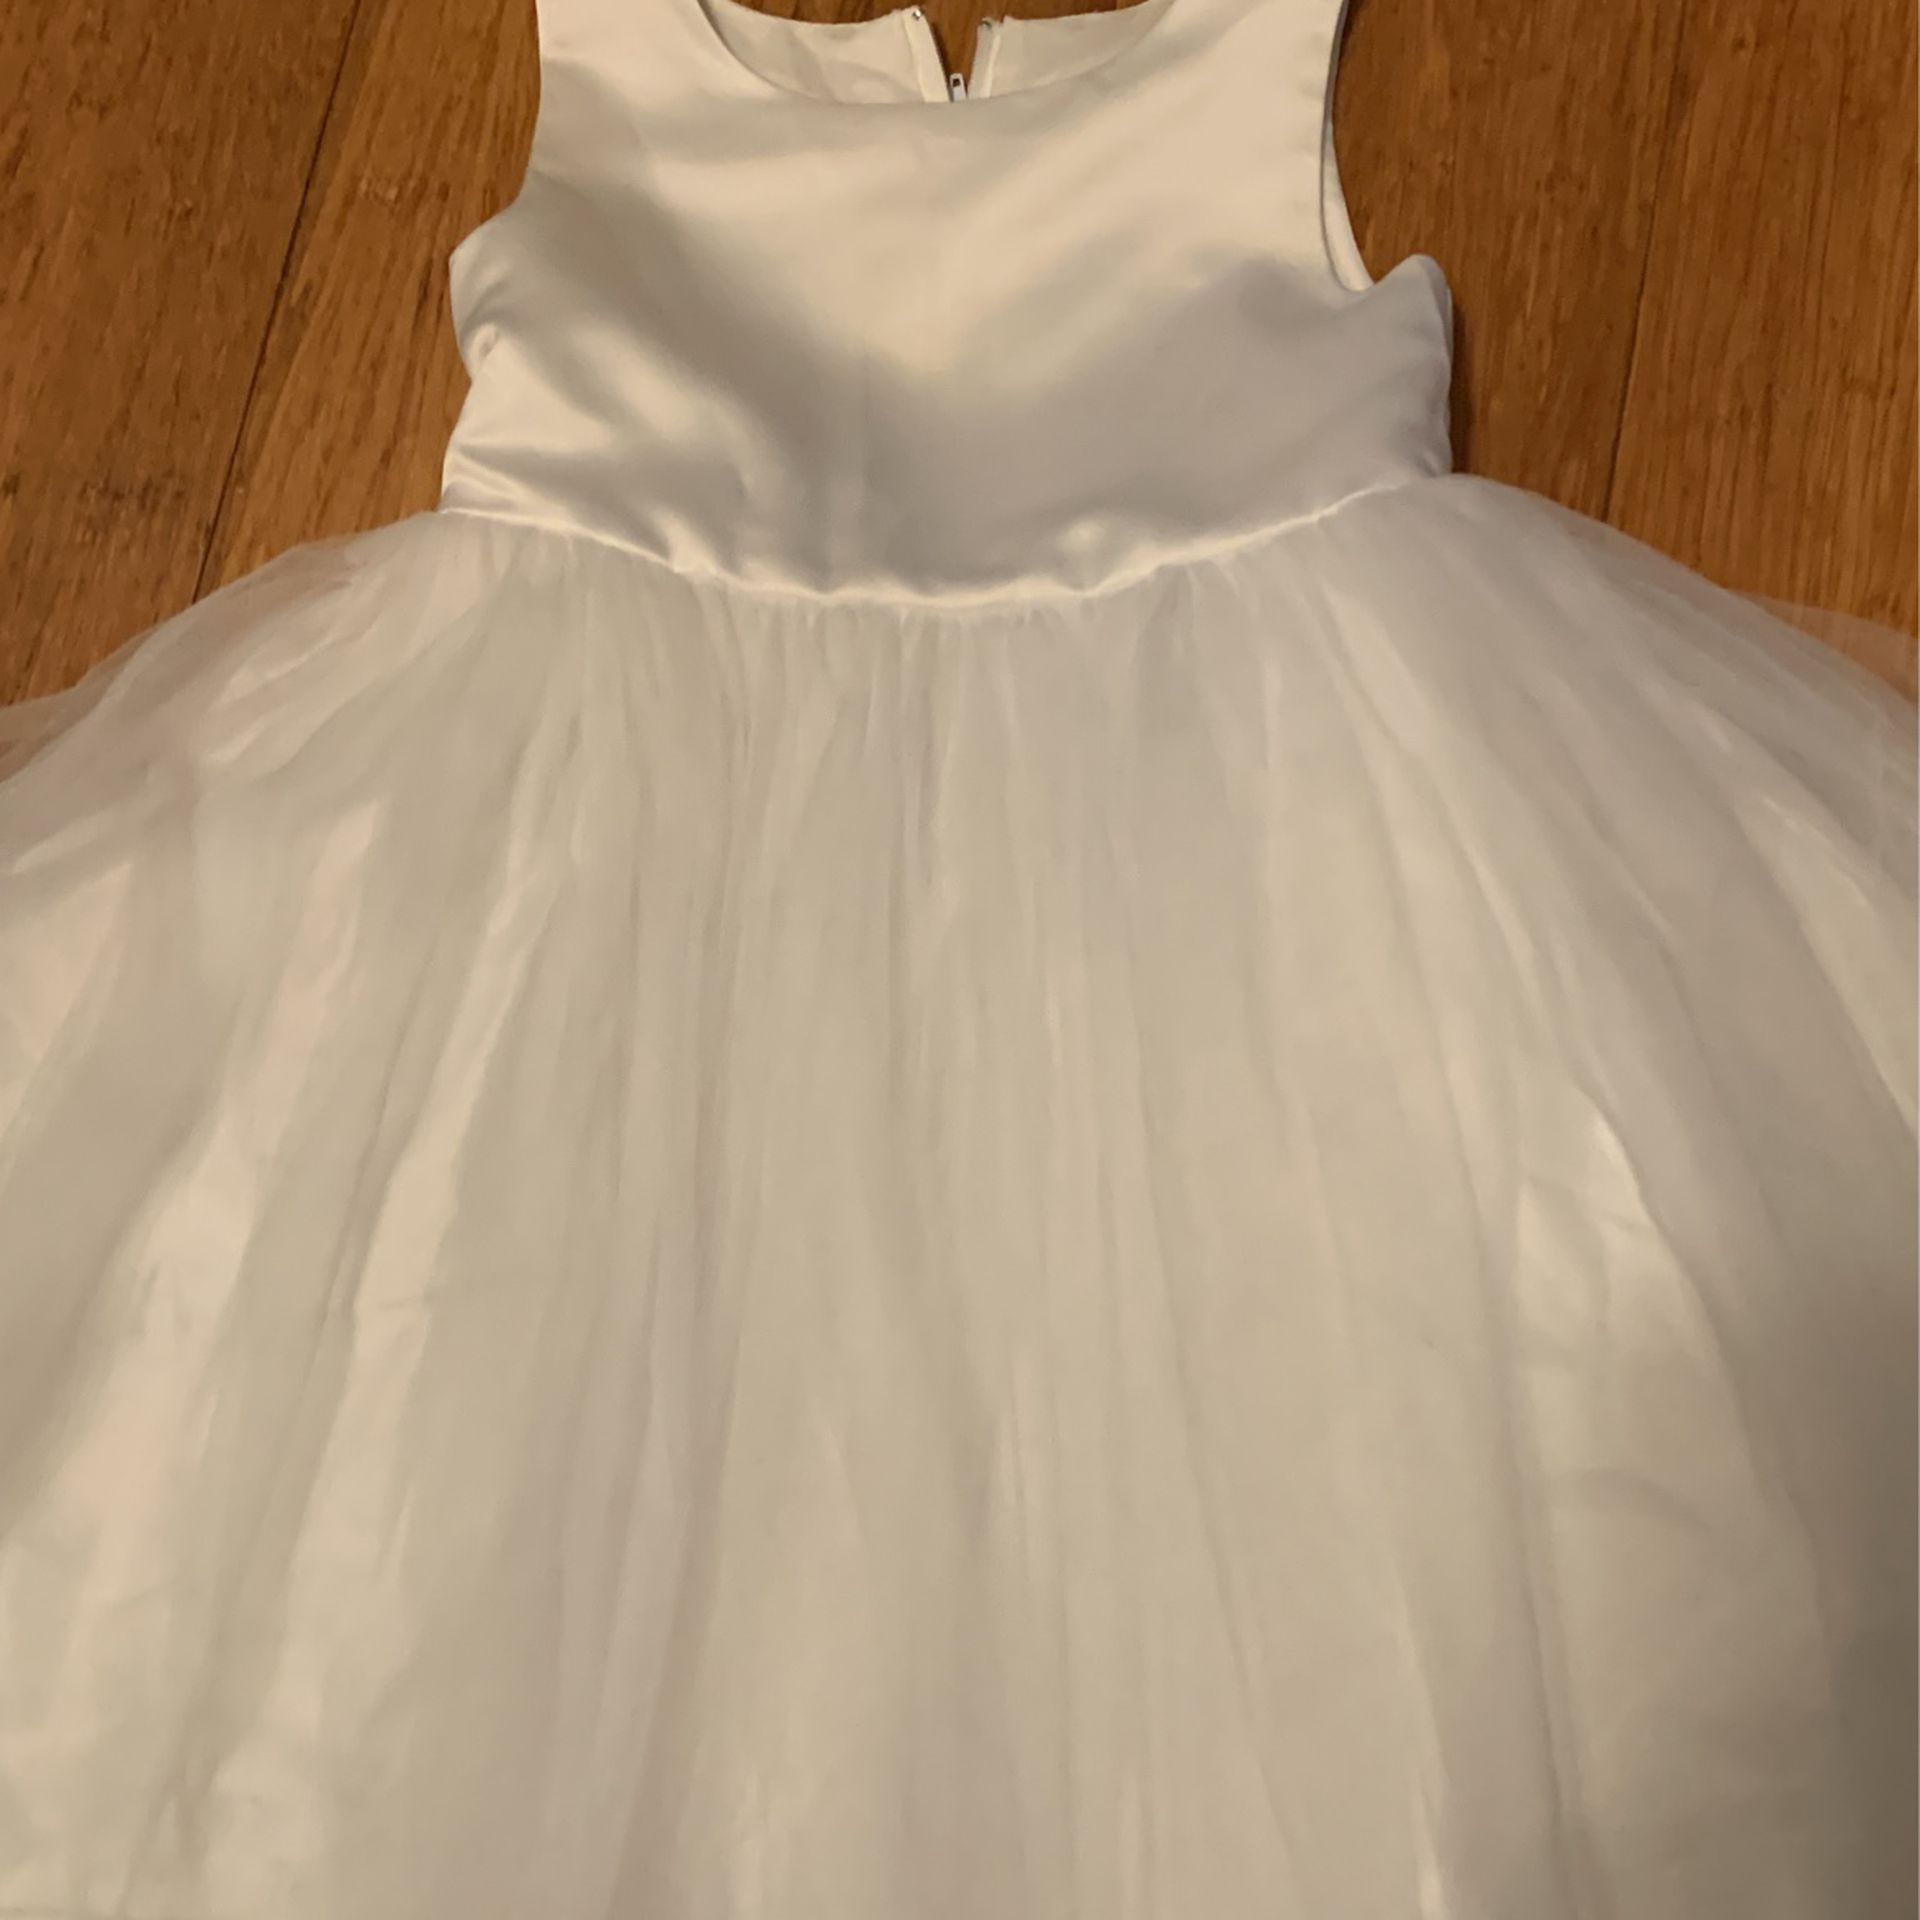 Dress- Flower Girl or Other Formal Occasion 